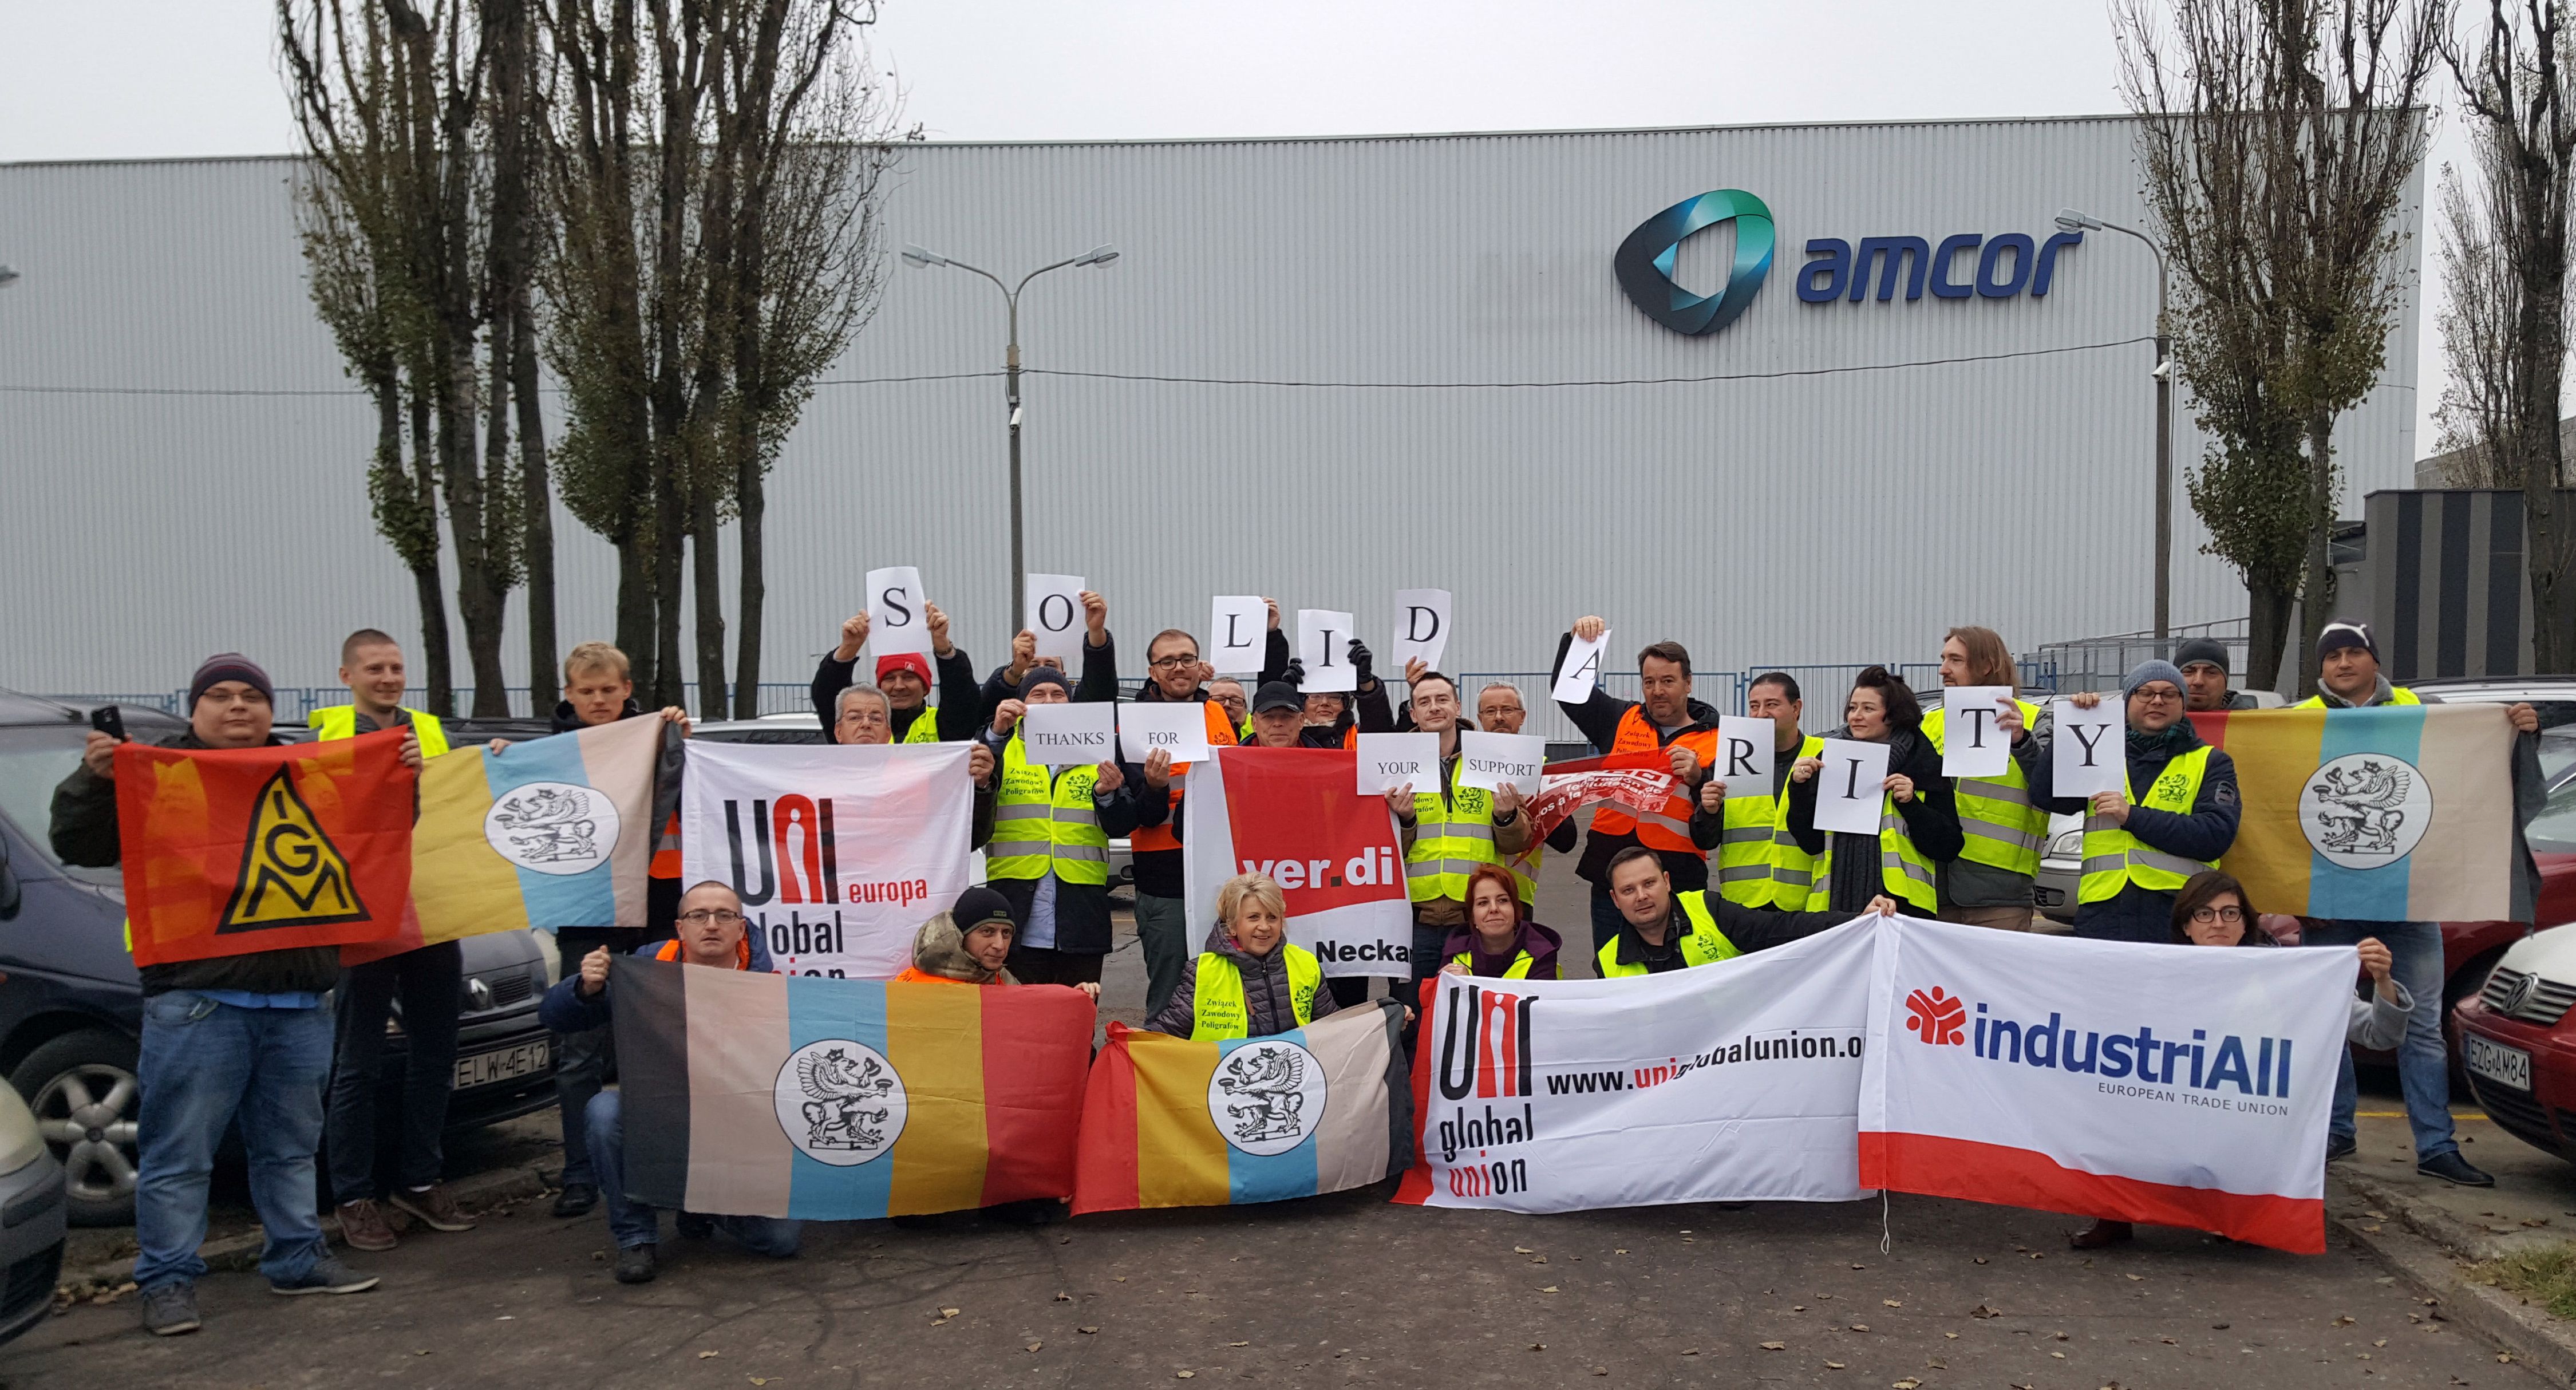 European trade unions hail successful organising action at Amcor in Poland